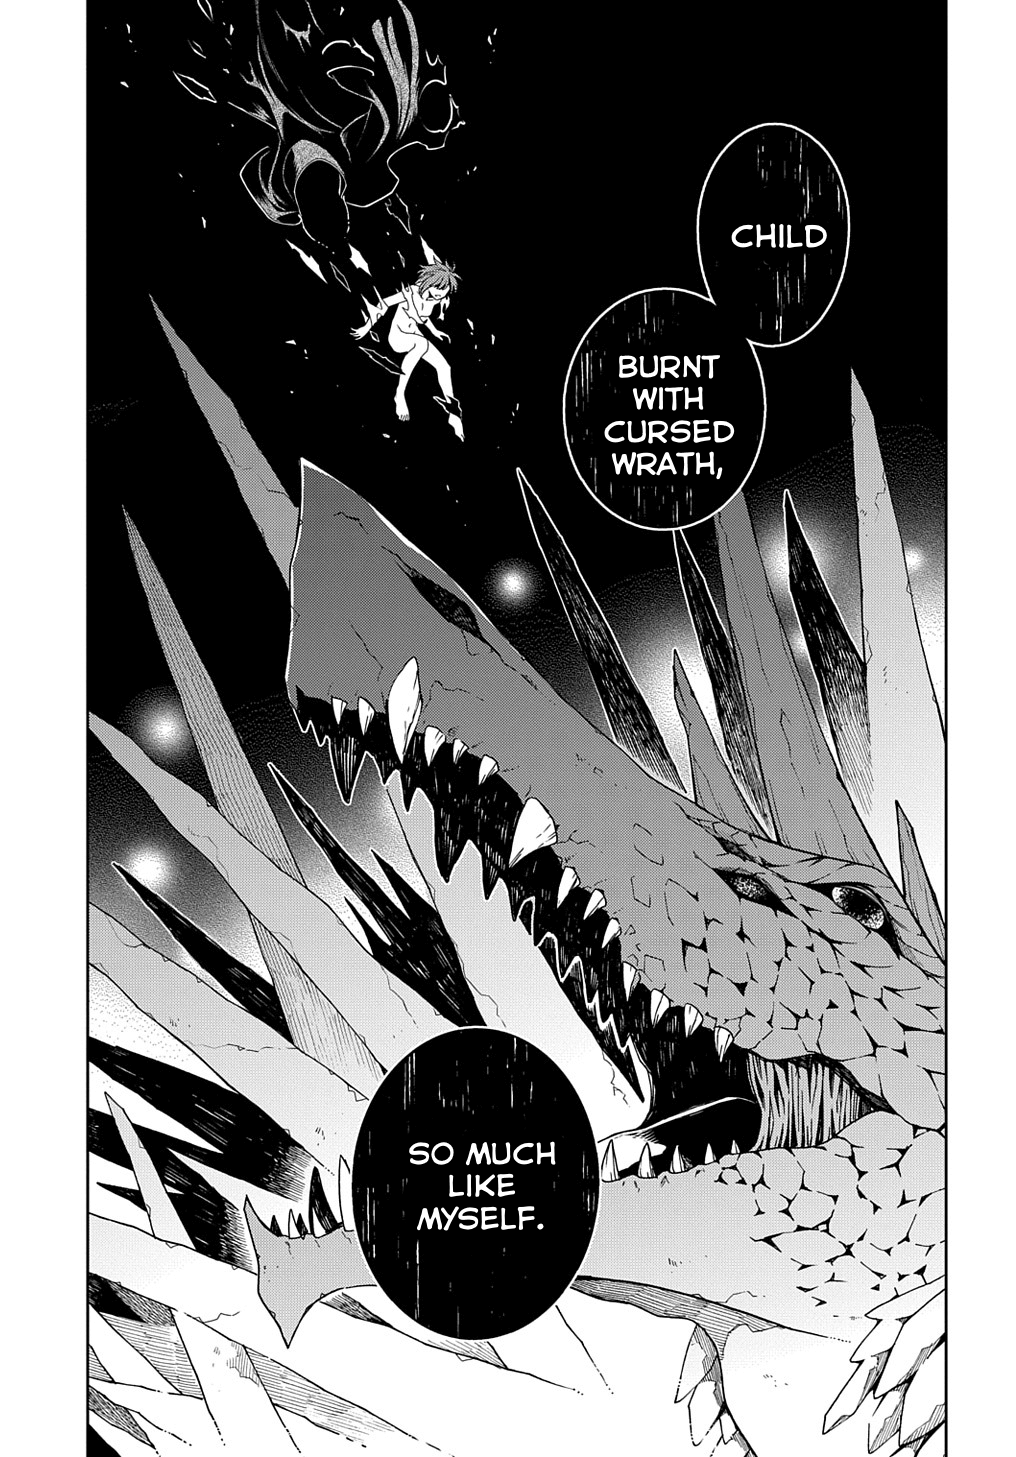 Mahoutsukai no Yome Vol.17-Chapter.82-Man's-extremity-is-God's-opportunity.-I Image